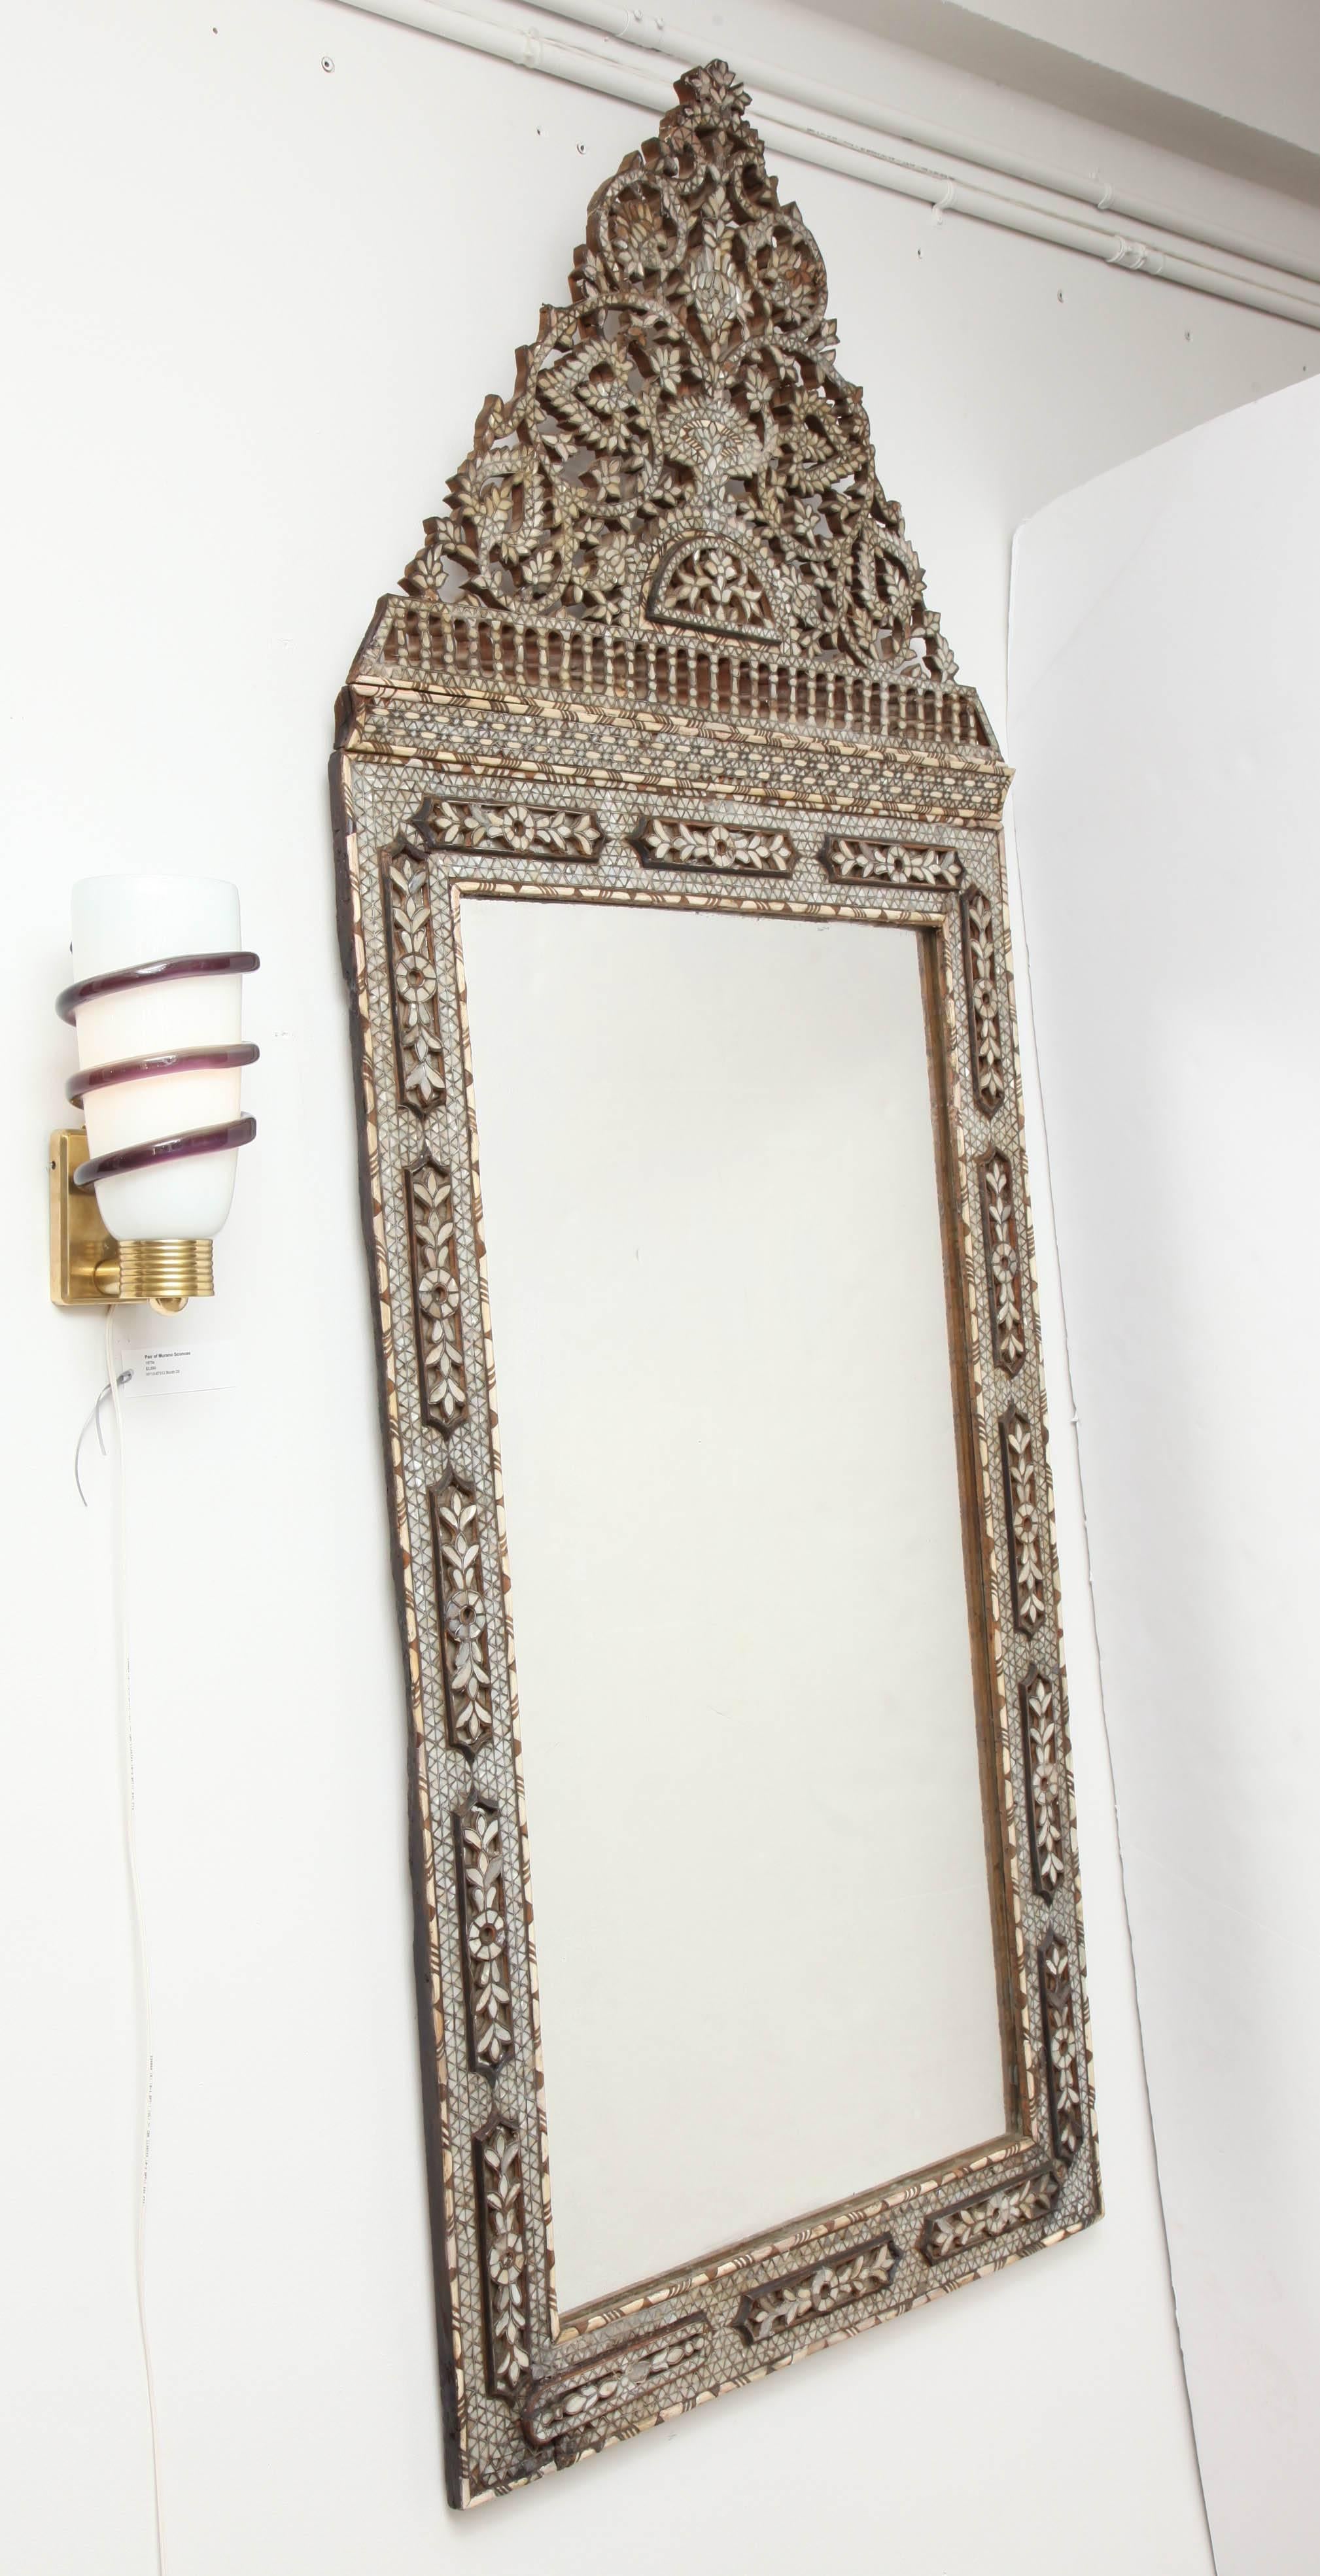 Oversized mother and pearl Syrian mirror with floral and geometric design on the crown. The glass is period from the mid-19th century.